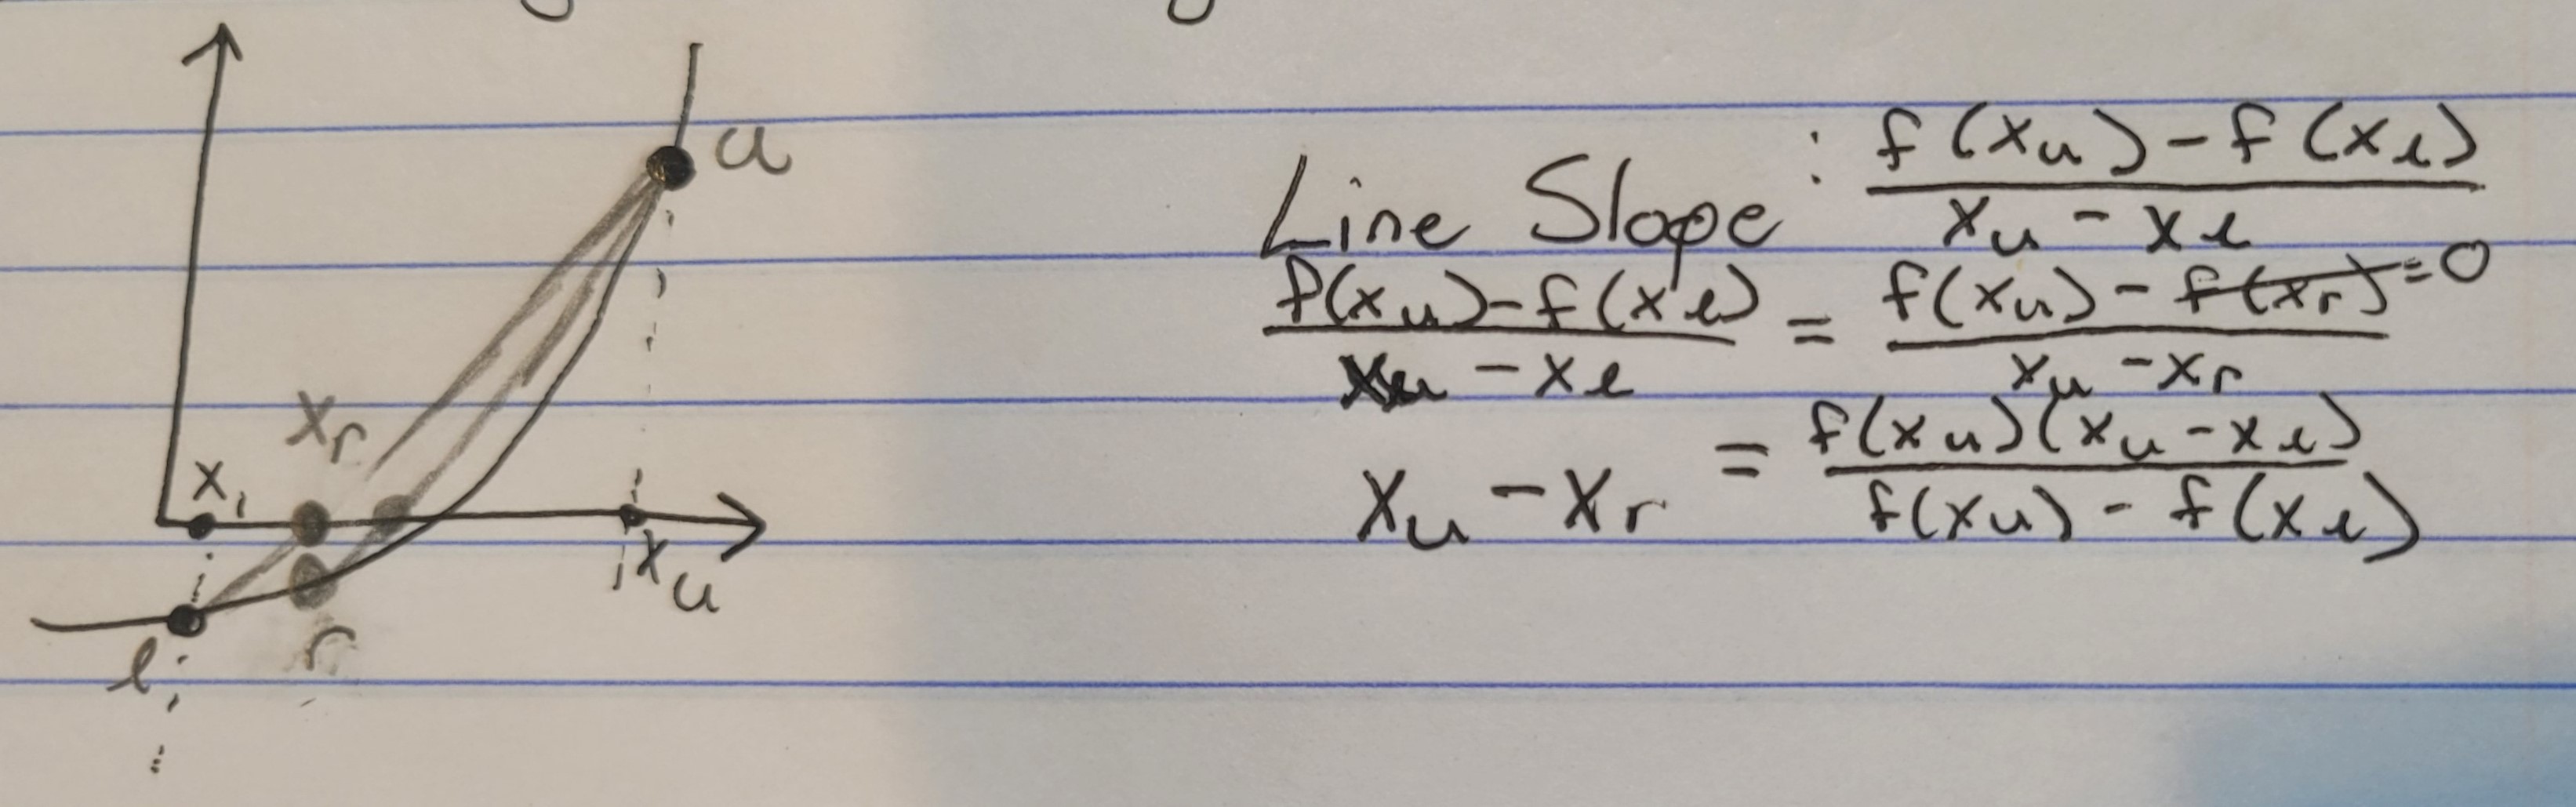 <ol><li><p>Start with 2 values that bracket a singular root, L and U</p></li><li><p>Calculate slope between the to points (draw line)</p></li><li><p>Where the line crosses the x axis is the x value for R (slope line y=0)</p></li><li><p>Find the correlating y value for the X_r on the function line</p></li><li><p>Last step:</p><ul><li><p>If Y_r = 0 done</p></li><li><p>If Y_r * Y_l = pos replace L with R and repeat</p></li><li><p>If Y_r*Y_l = neg replace U with R and repeat</p></li></ul></li></ol>